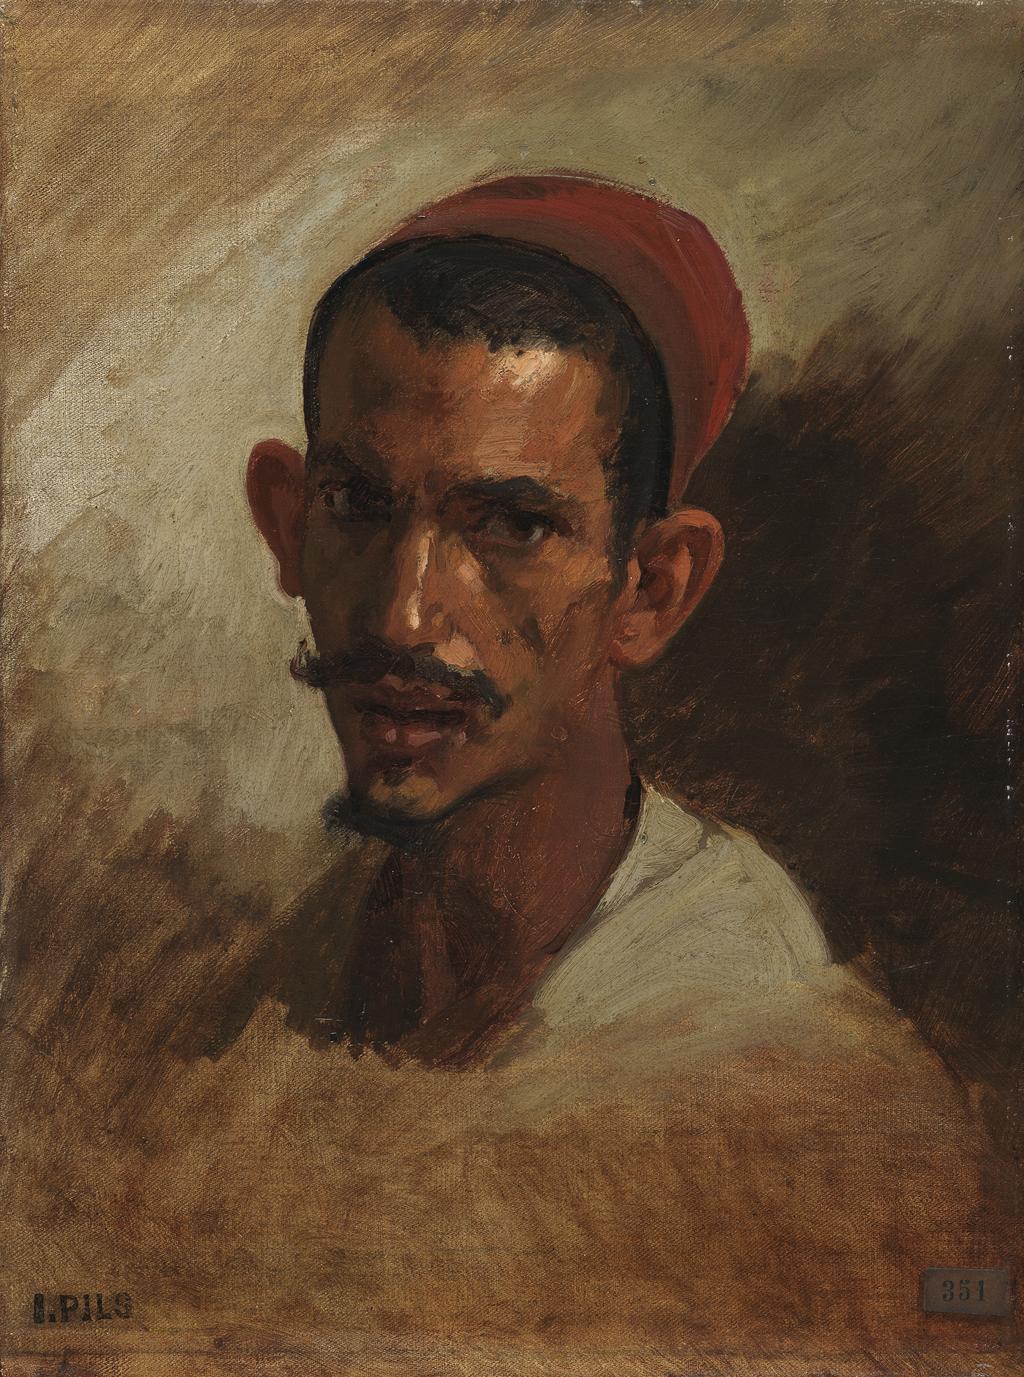 An image of Study for the head of a young Arab. Pils, Isidore Alexandre Augustin (French, 1813/15-1875). Oil on canvas, height 33 cm, width 24 cm, circa 1860-1862. Production Note: This is a study for one of the figures in Pils' painting La reception des chefs arabes par Napoléon III, painted for Napoleon III to commemorate his visit to Algeria with Empress Eugénie.